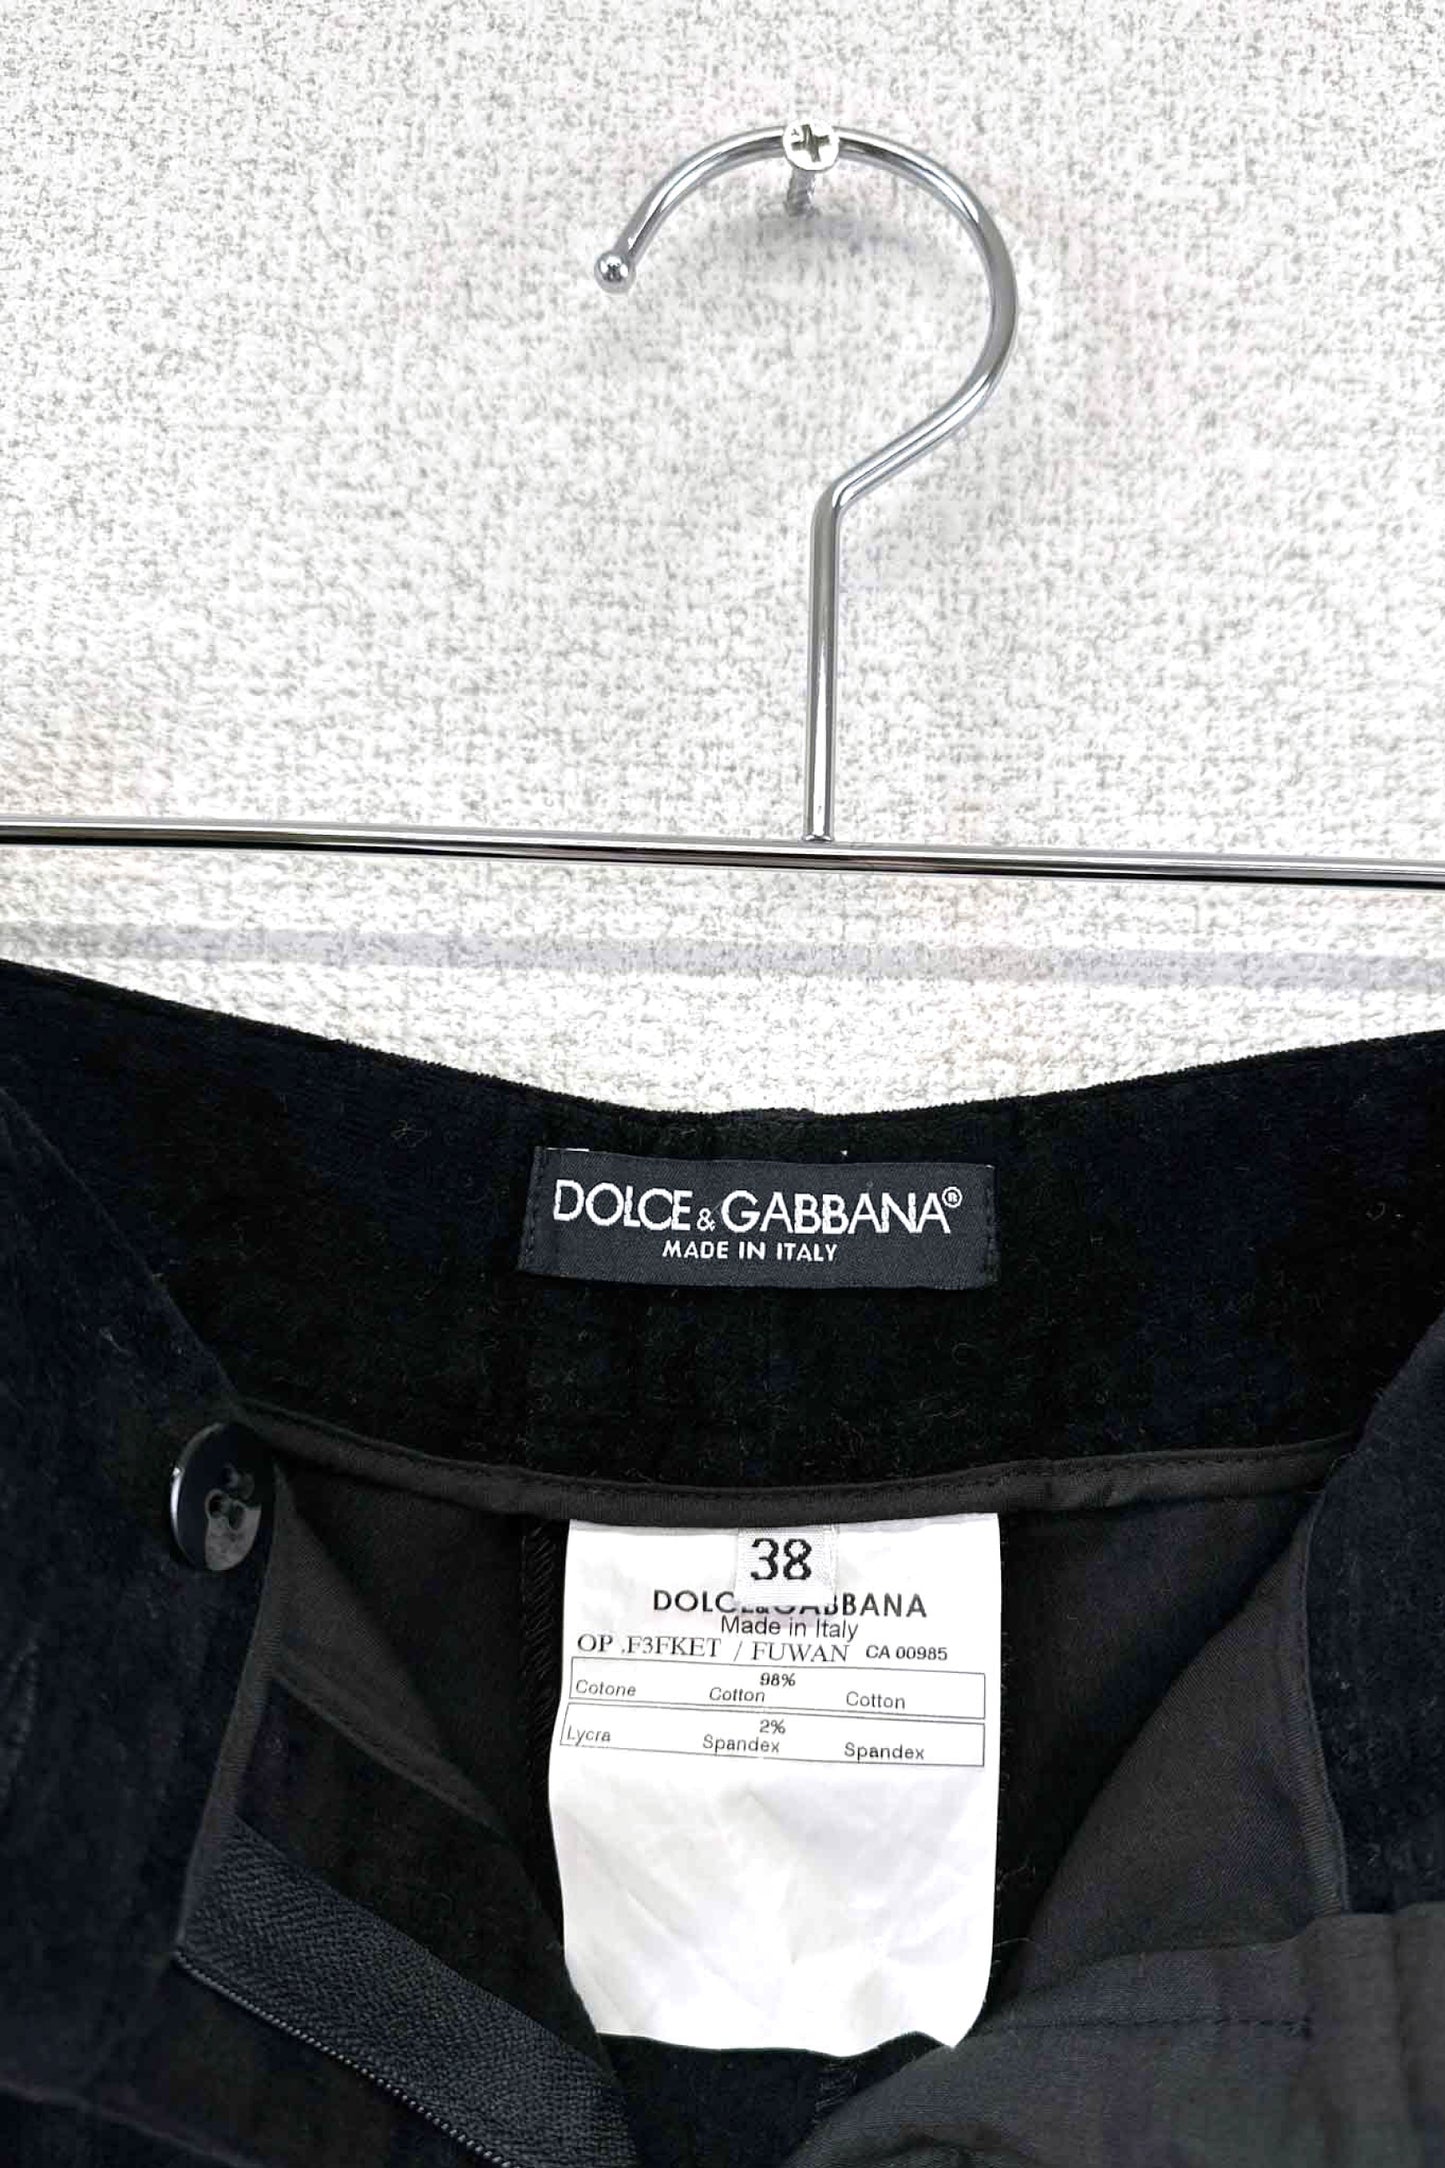 Made in ITALY DOLCE&GABBANA velor pants